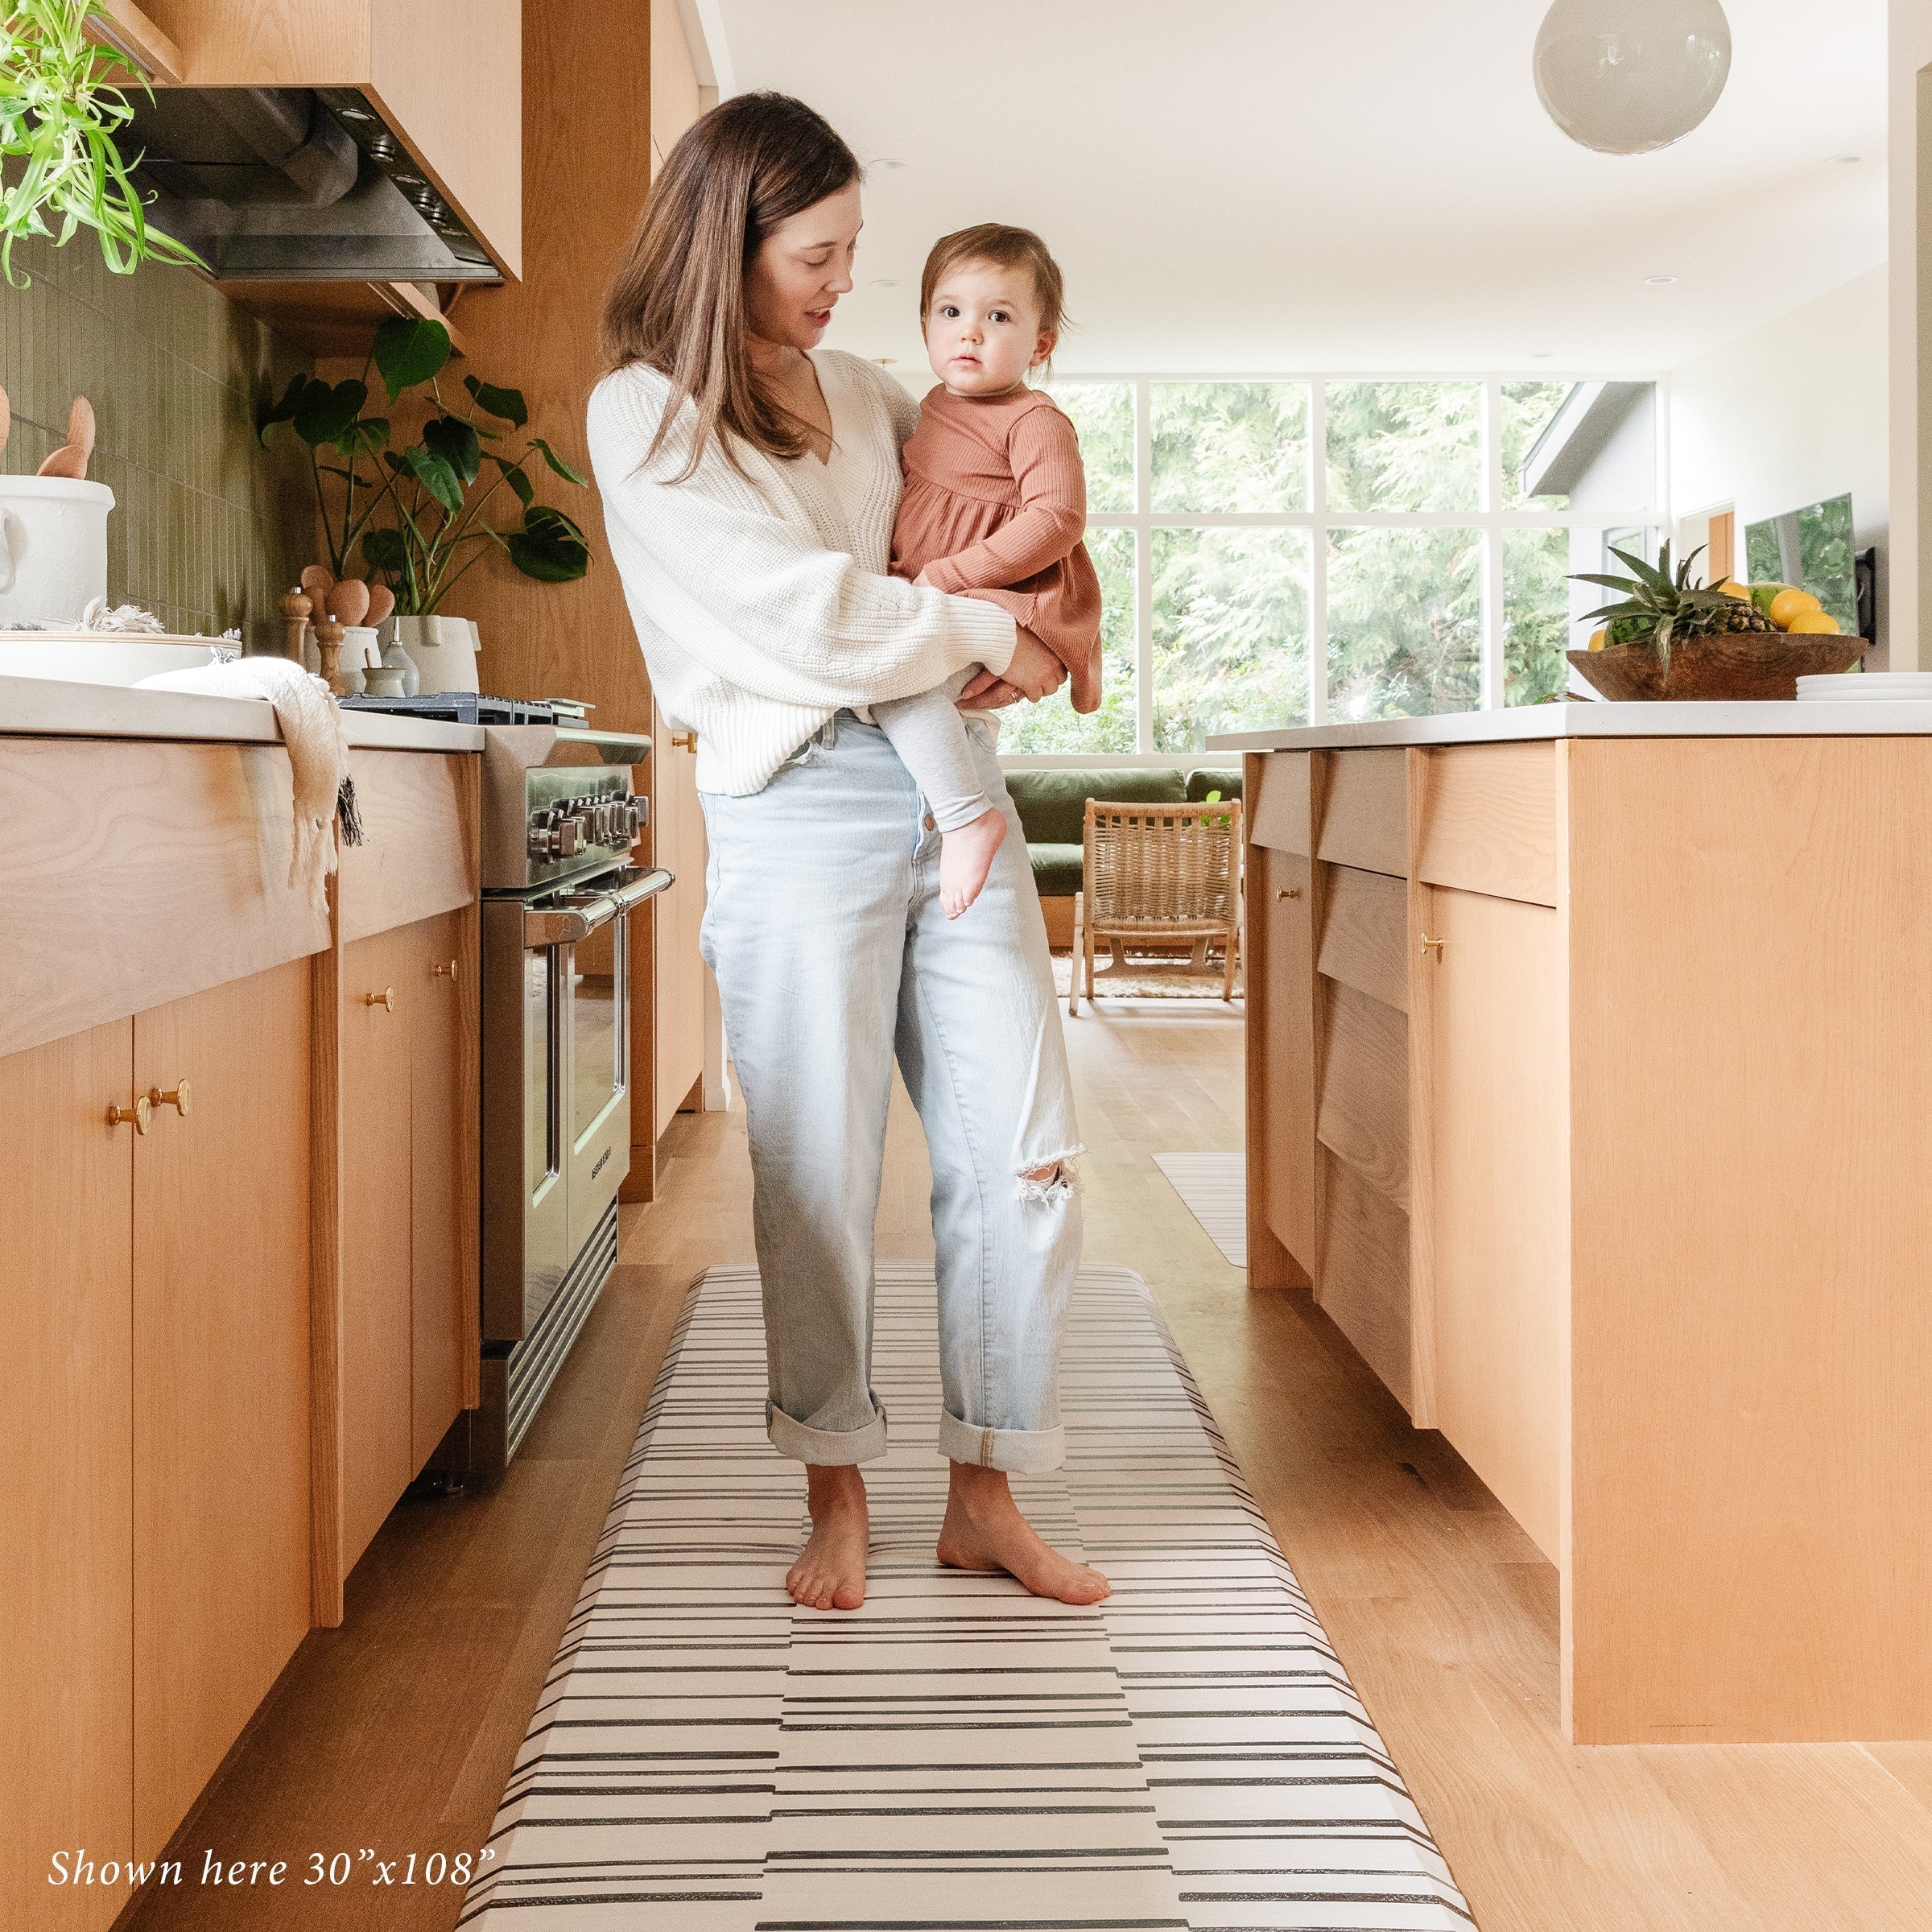 Black and White Minimal Inverted Stripe Print Standing Mat in kitchen with Mom and Baby in size 30x108